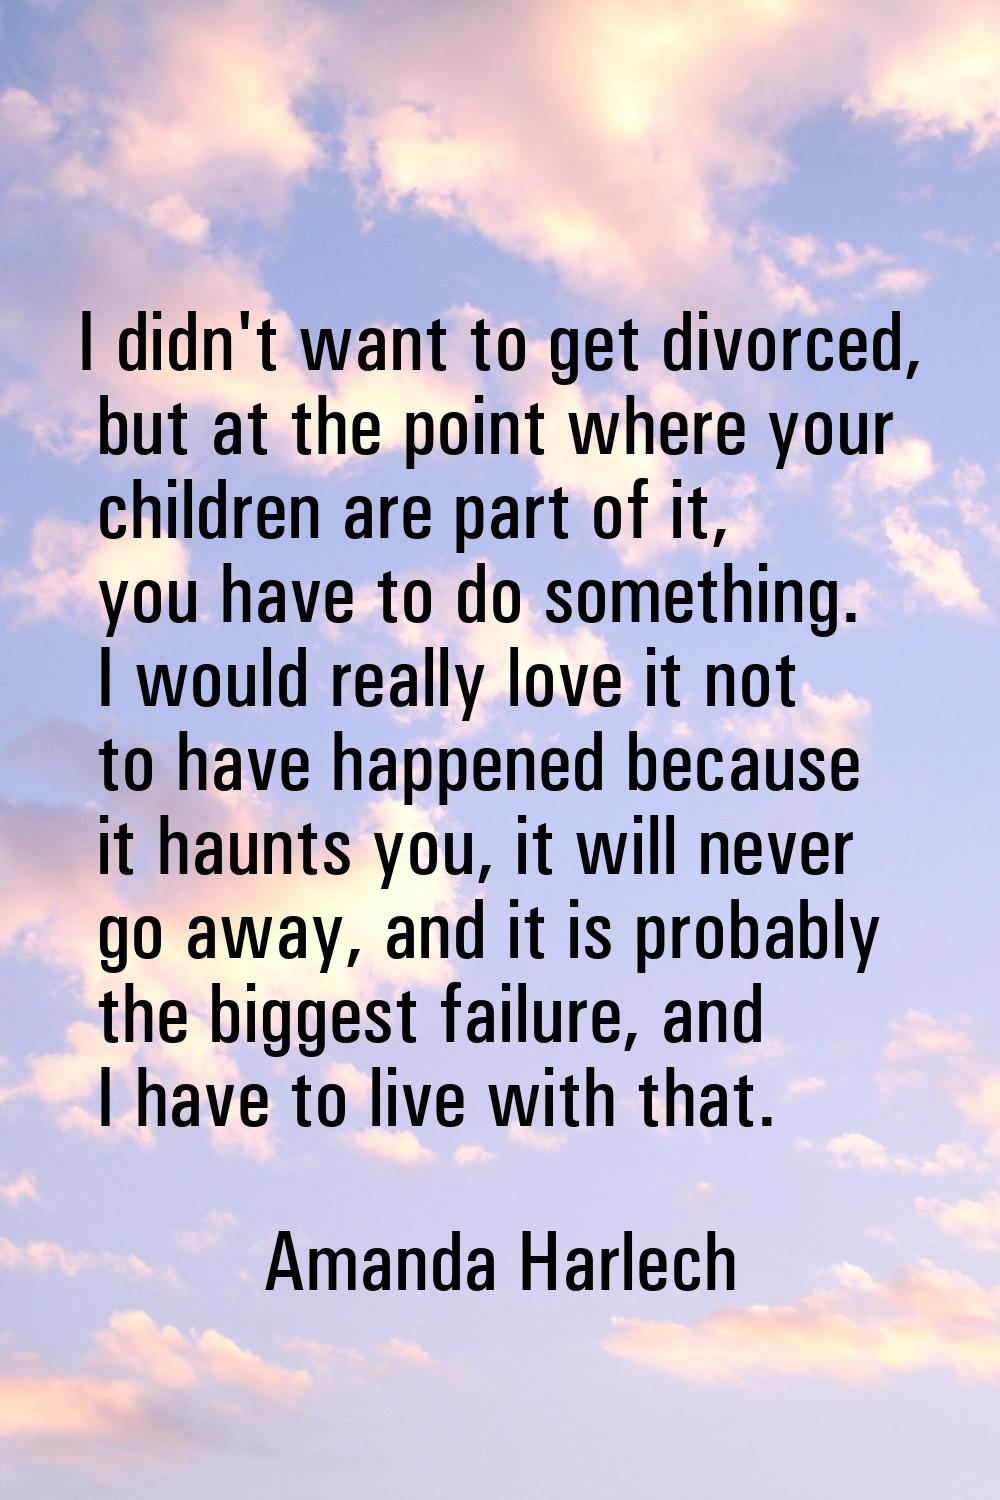 I didn't want to get divorced, but at the point where your children are part of it, you have to do 